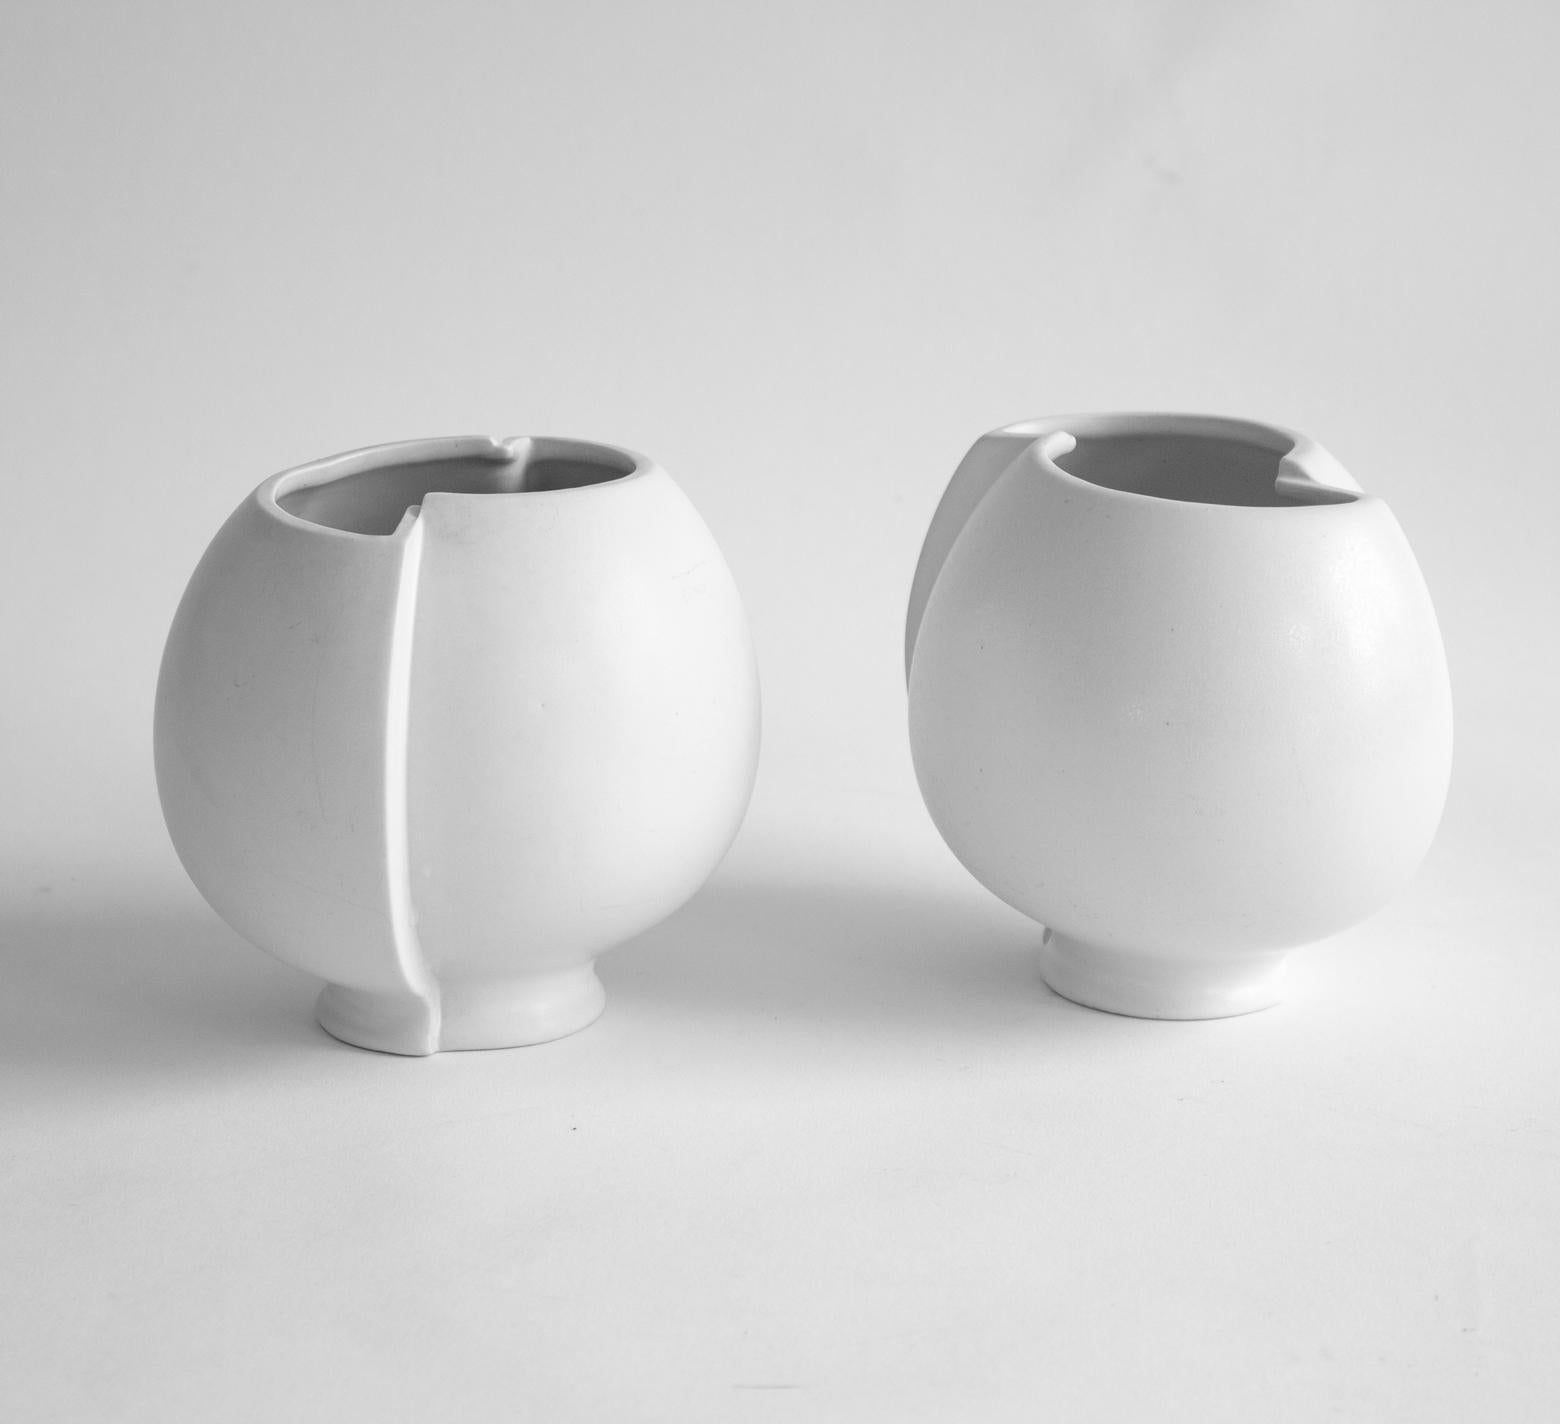 Pair of Scandinavian Modern stoneware vase, model Surrea with Carrara glaze, designed by Wilhelm Kåge for Gustavsberg. Good vintage condition, with signs of usage. Made 1950s.